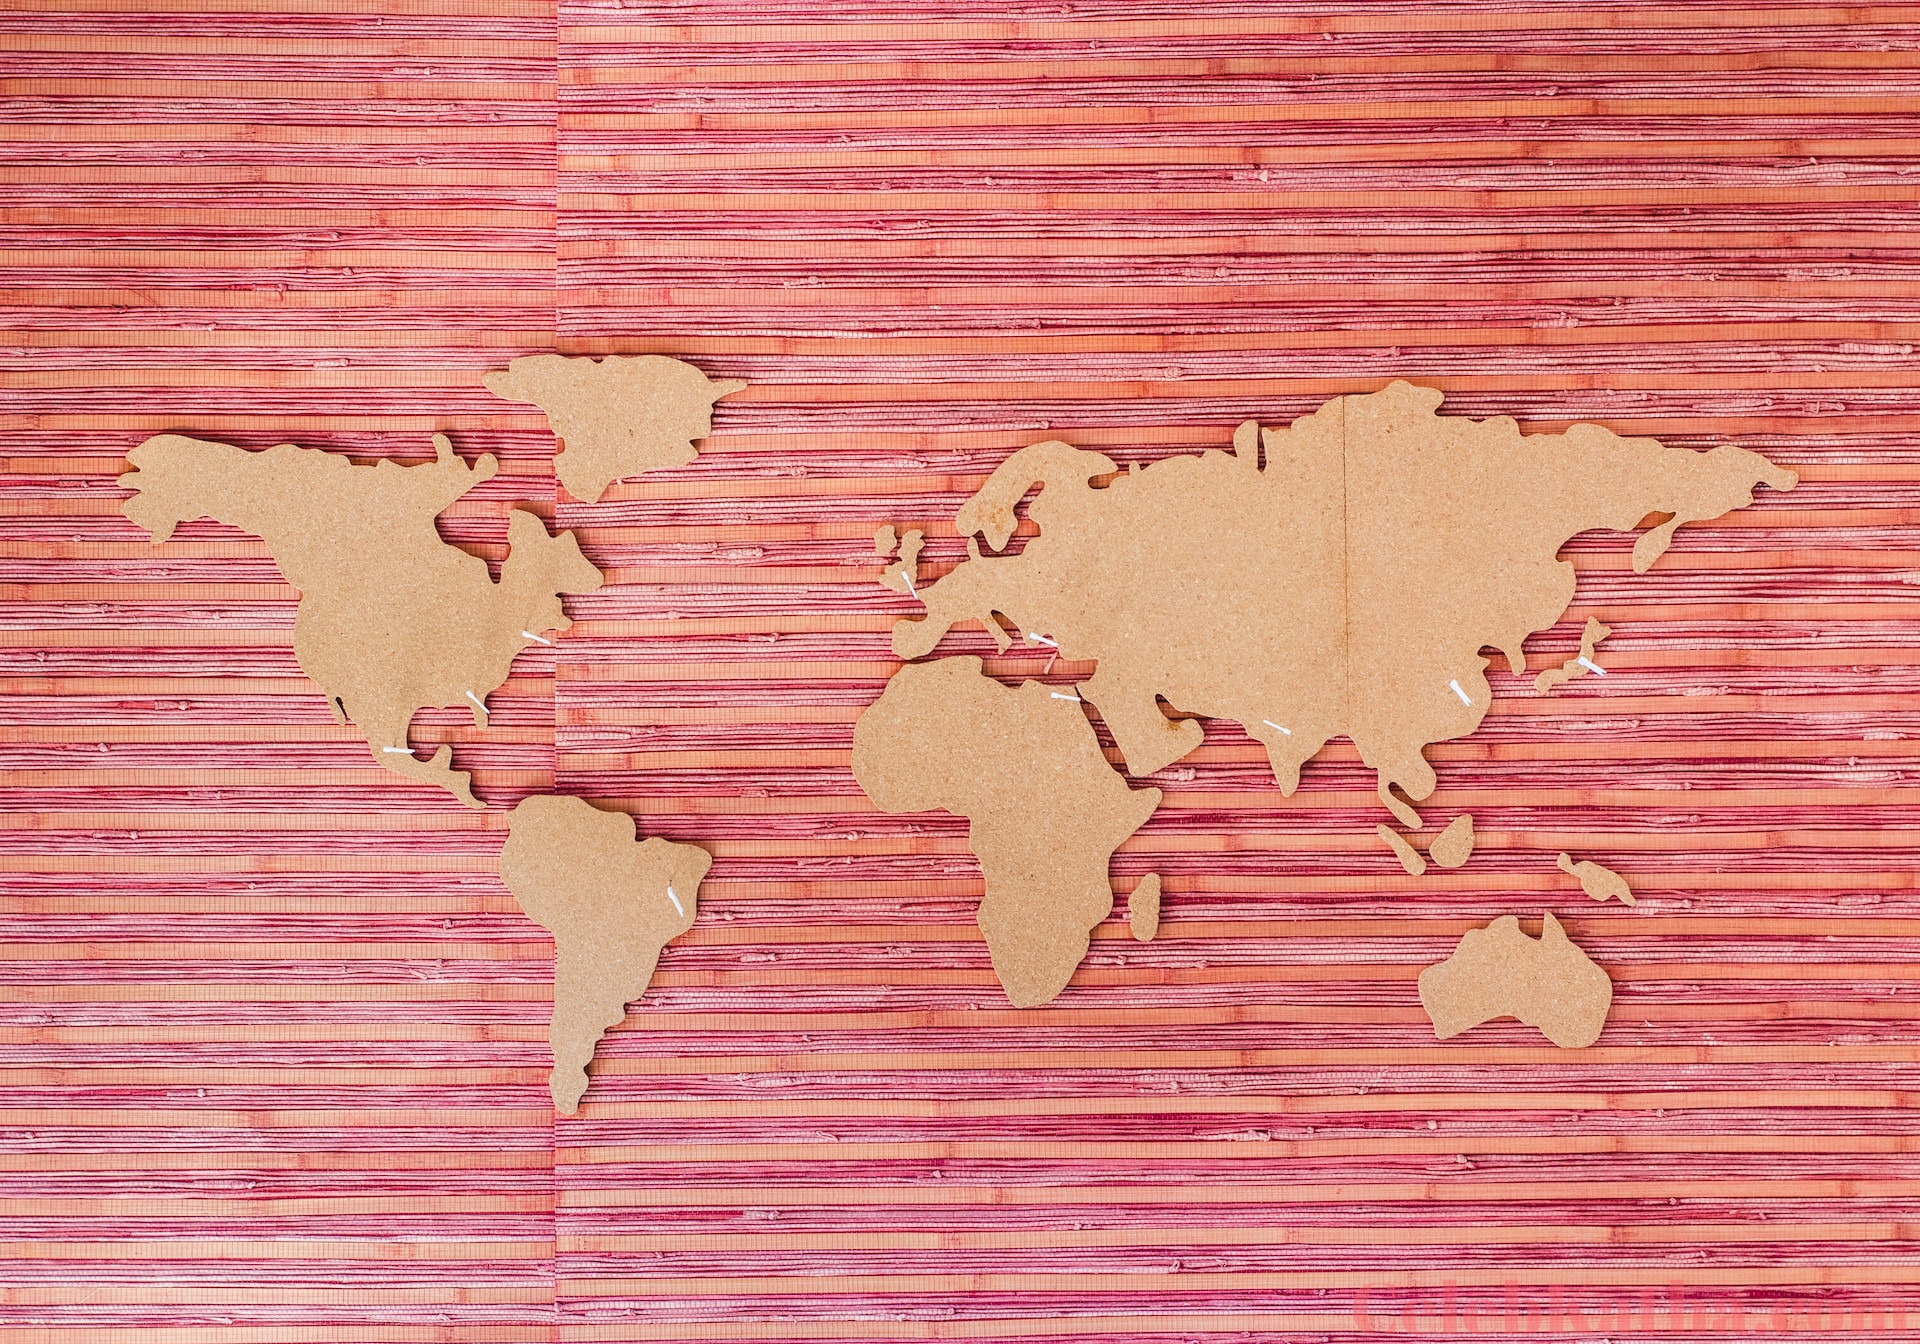 The Symbolism Behind Wooden Maps: More Than Just Geography